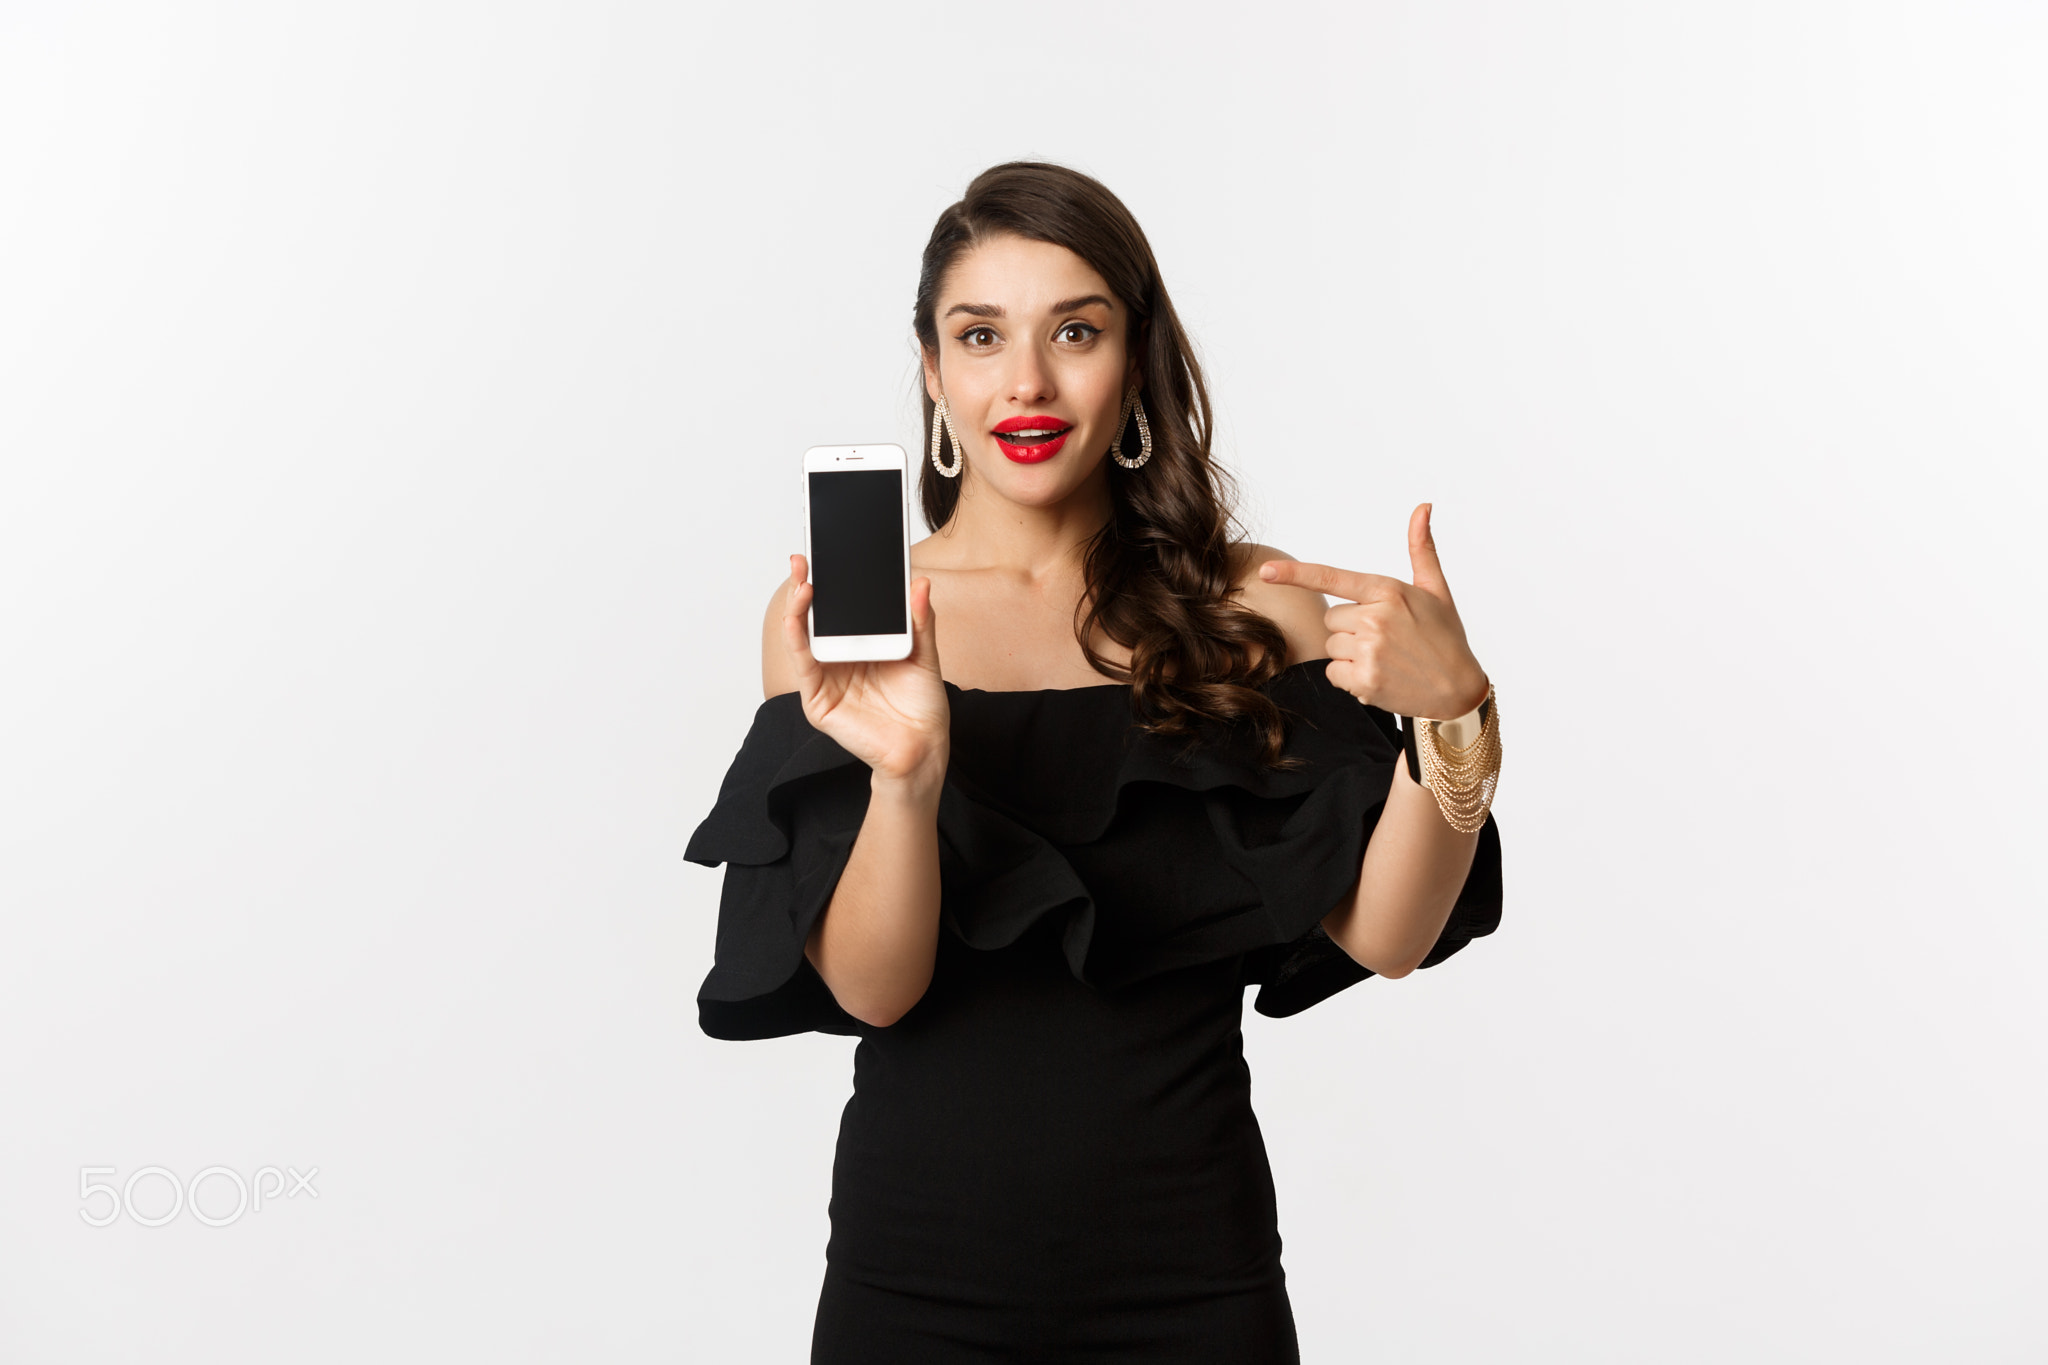 Online shopping concept. Fashionable woman in black dress pointing